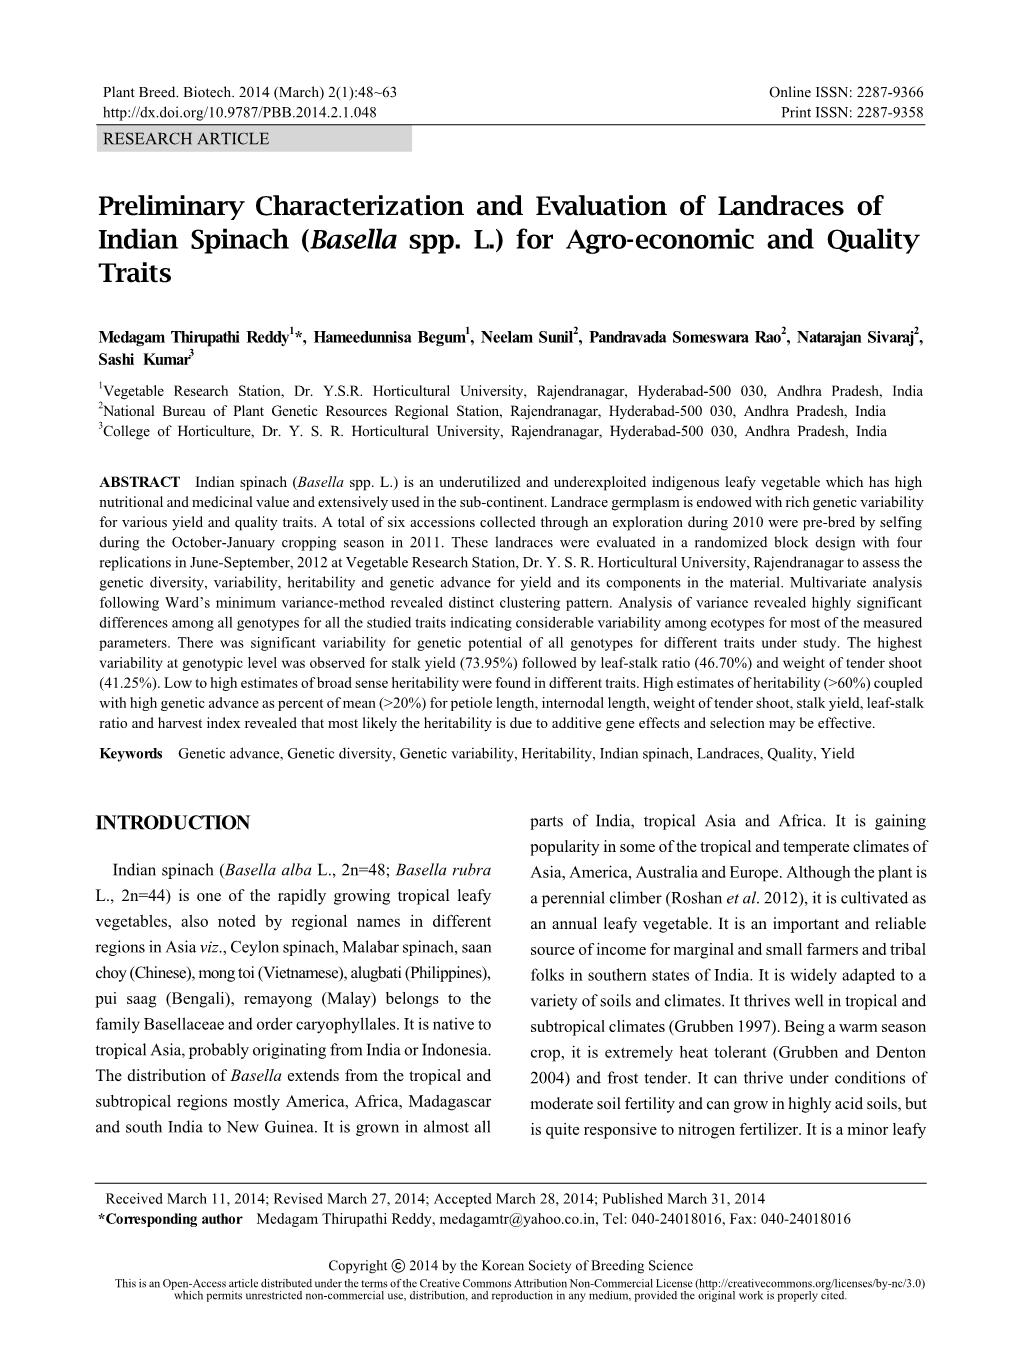 Preliminary Characterization and Evaluation of Landraces of Indian Spinach (Basella Spp